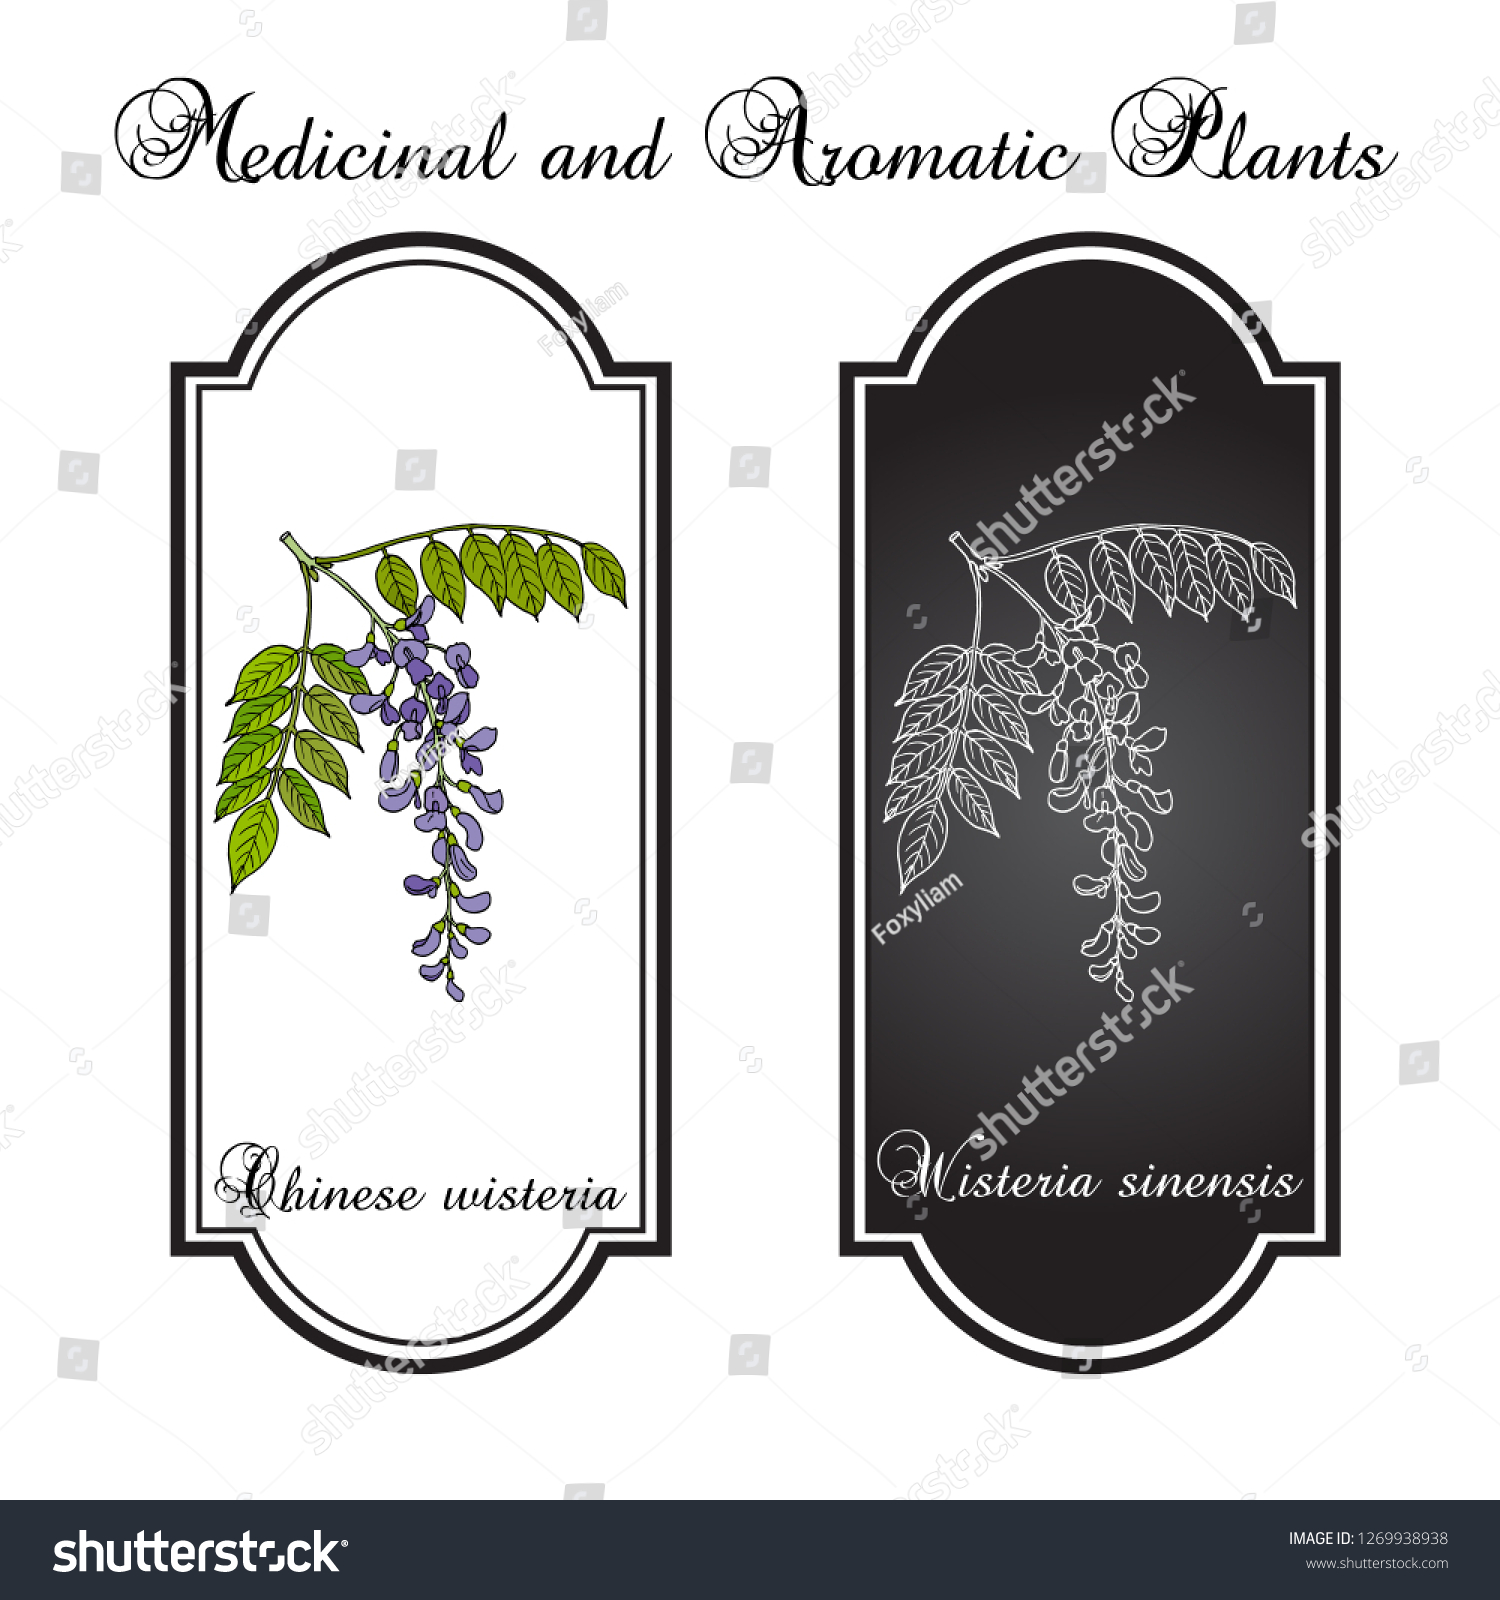 SVG of Chinese wisteria (Wisteria sinensis), ornamental and medicinal plant. Hand drawn botanical vector illustration svg